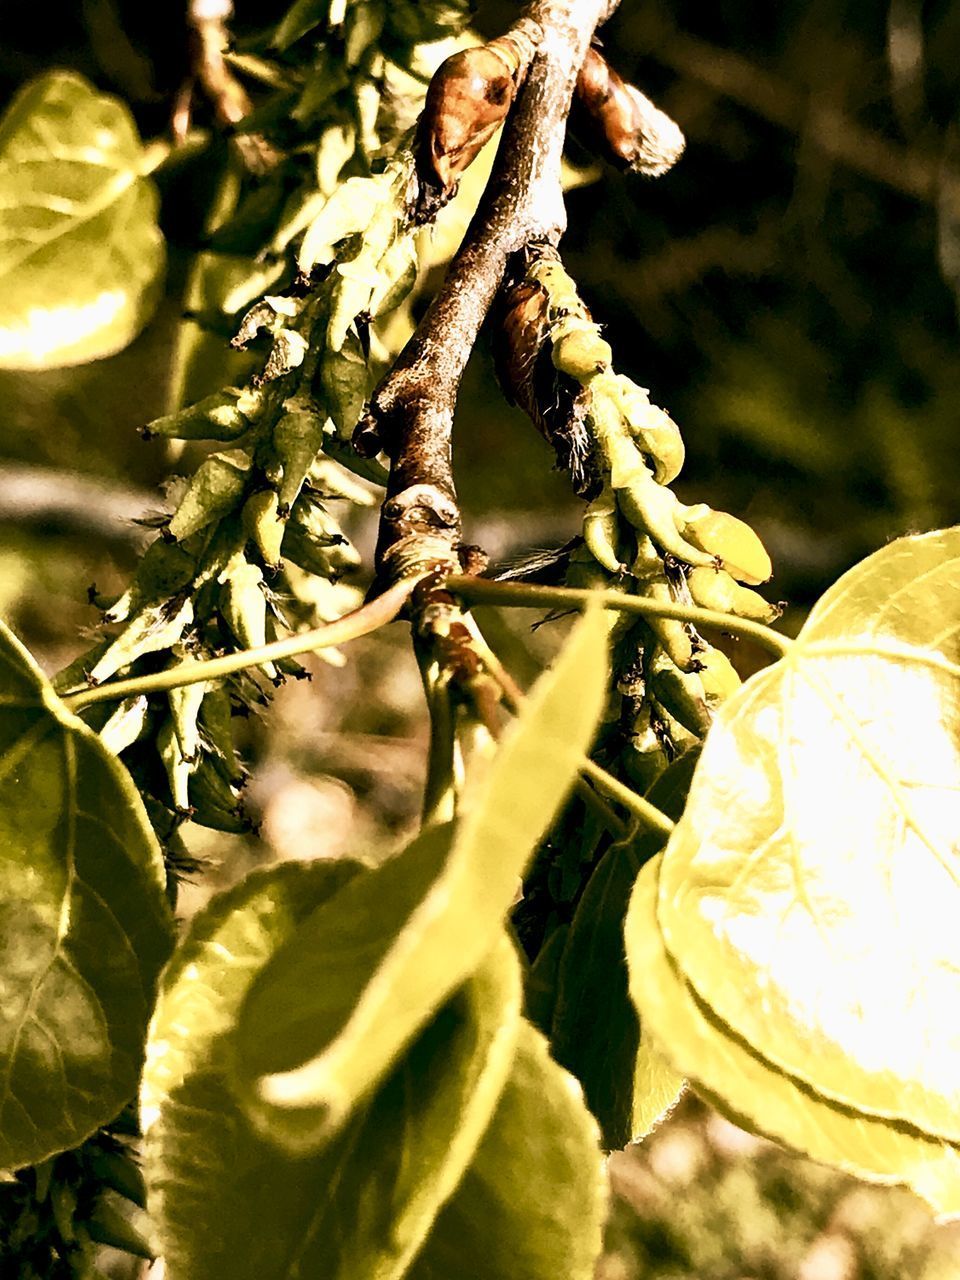 CLOSE-UP OF FRESH LEAVES ON PLANT